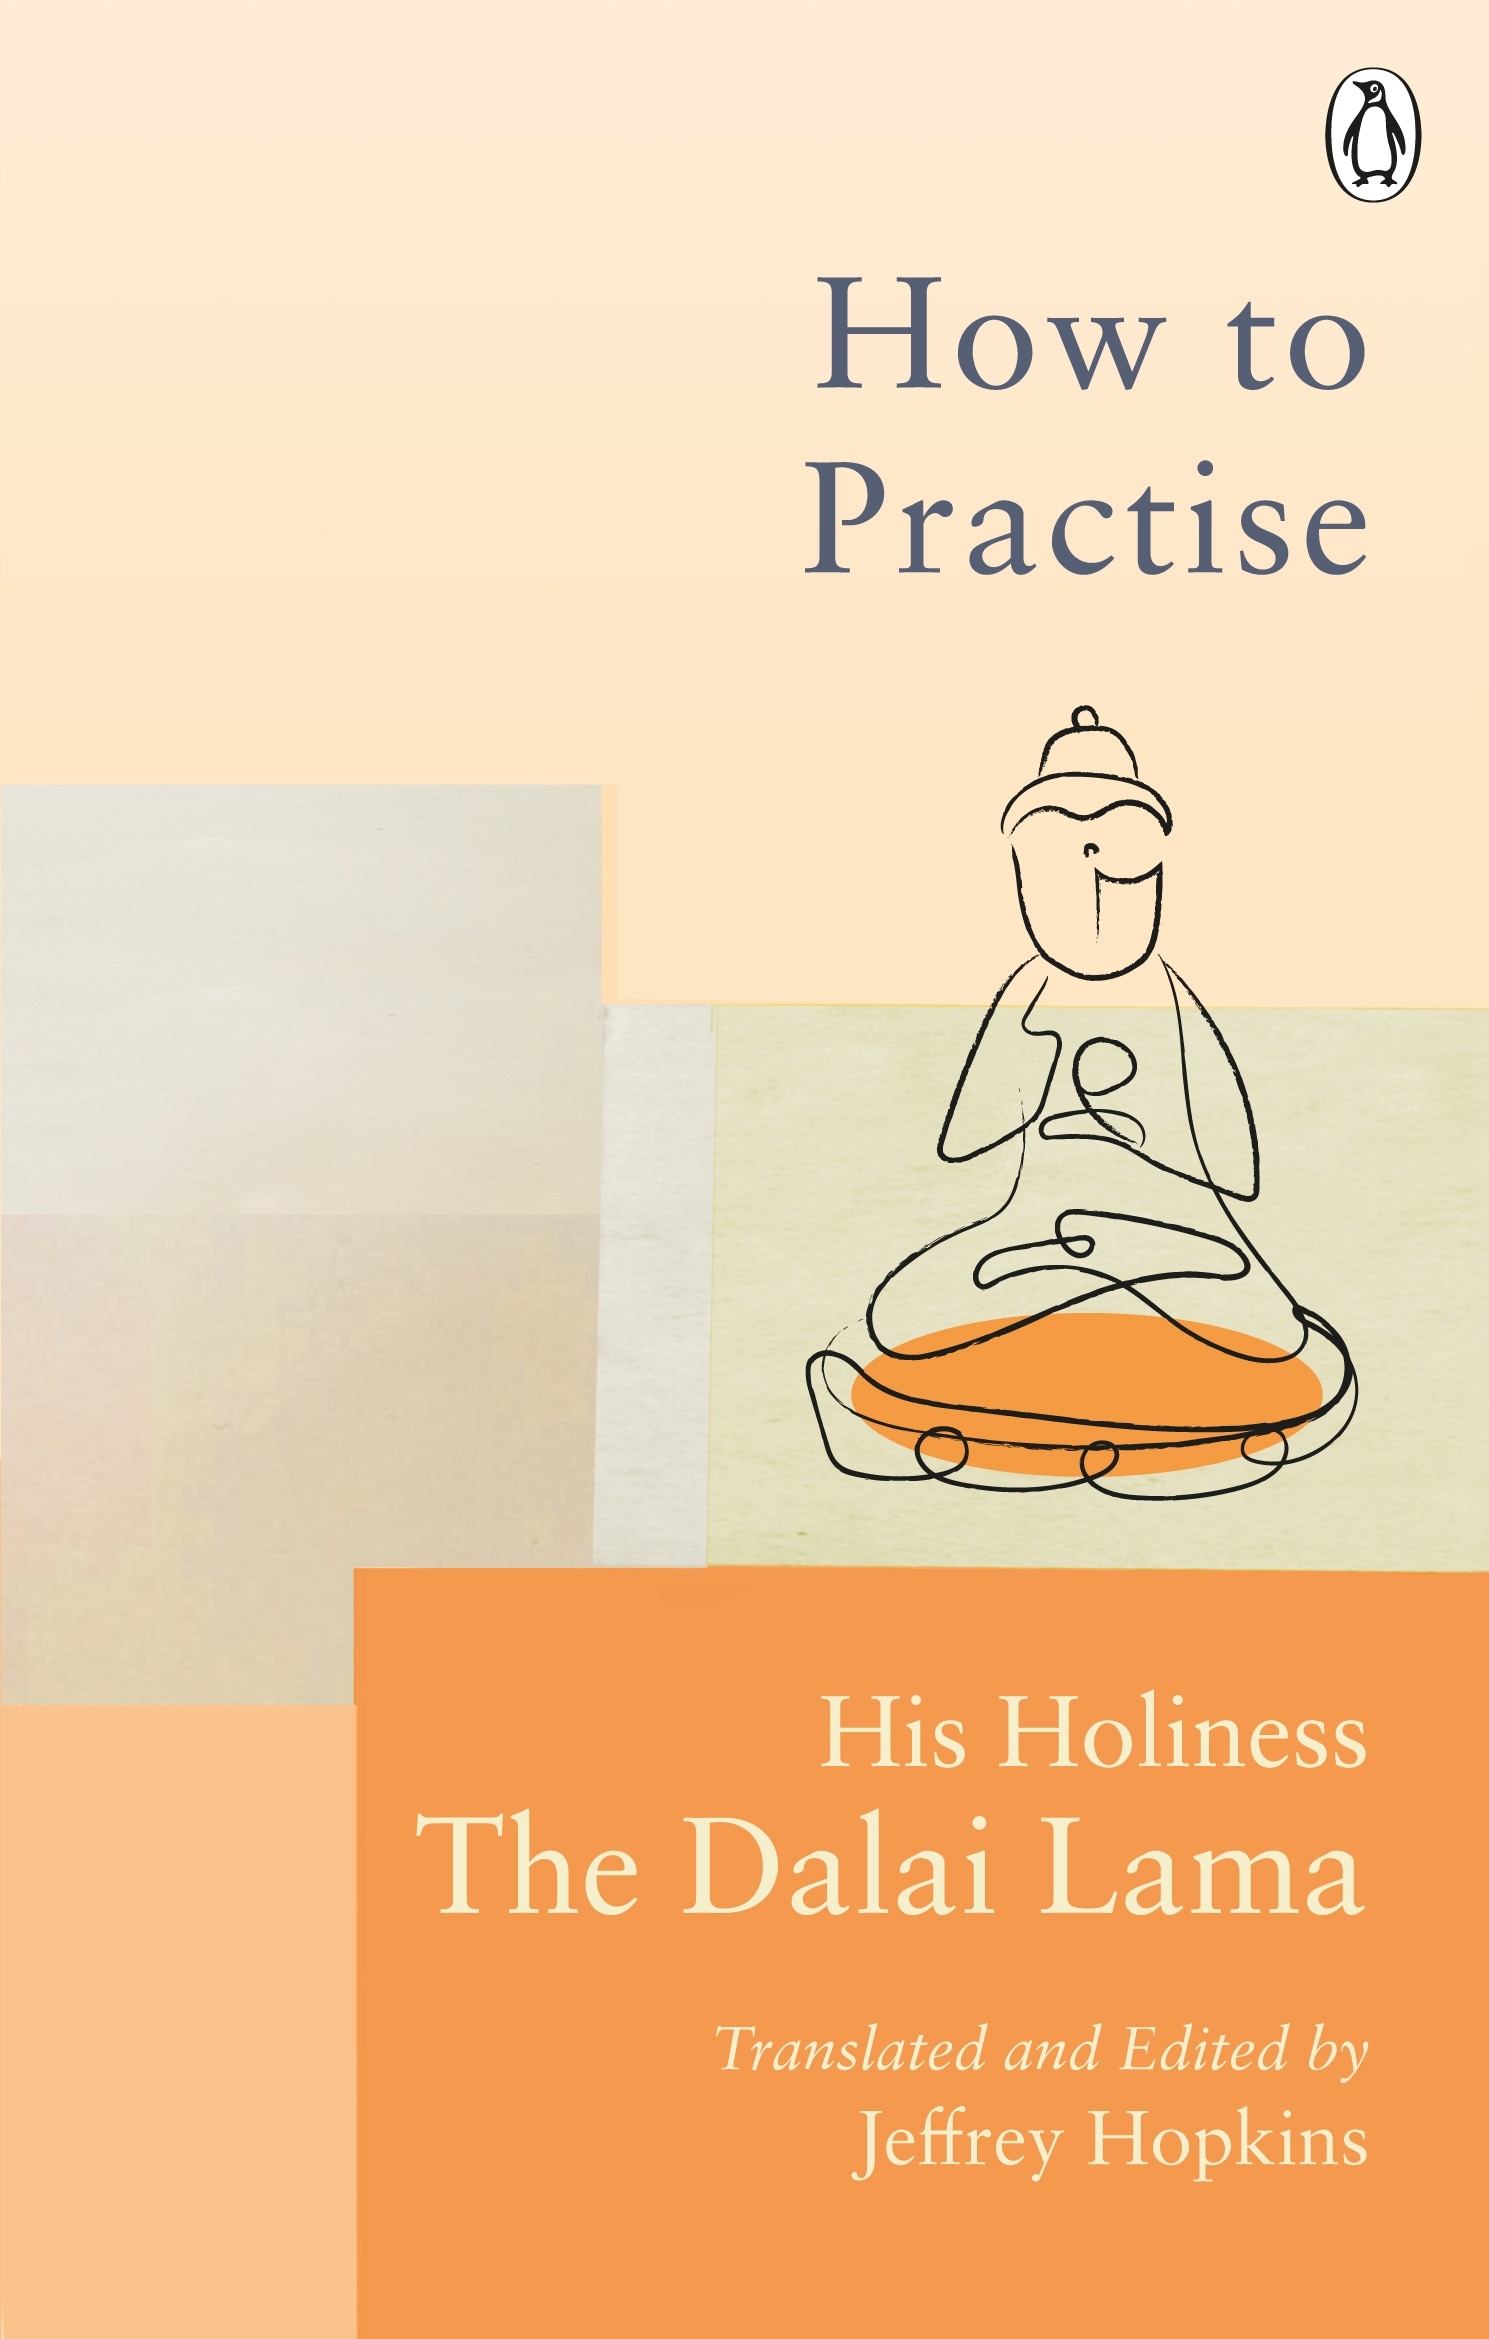 Book “How To Practise” by Dalai Lama — January 7, 2021